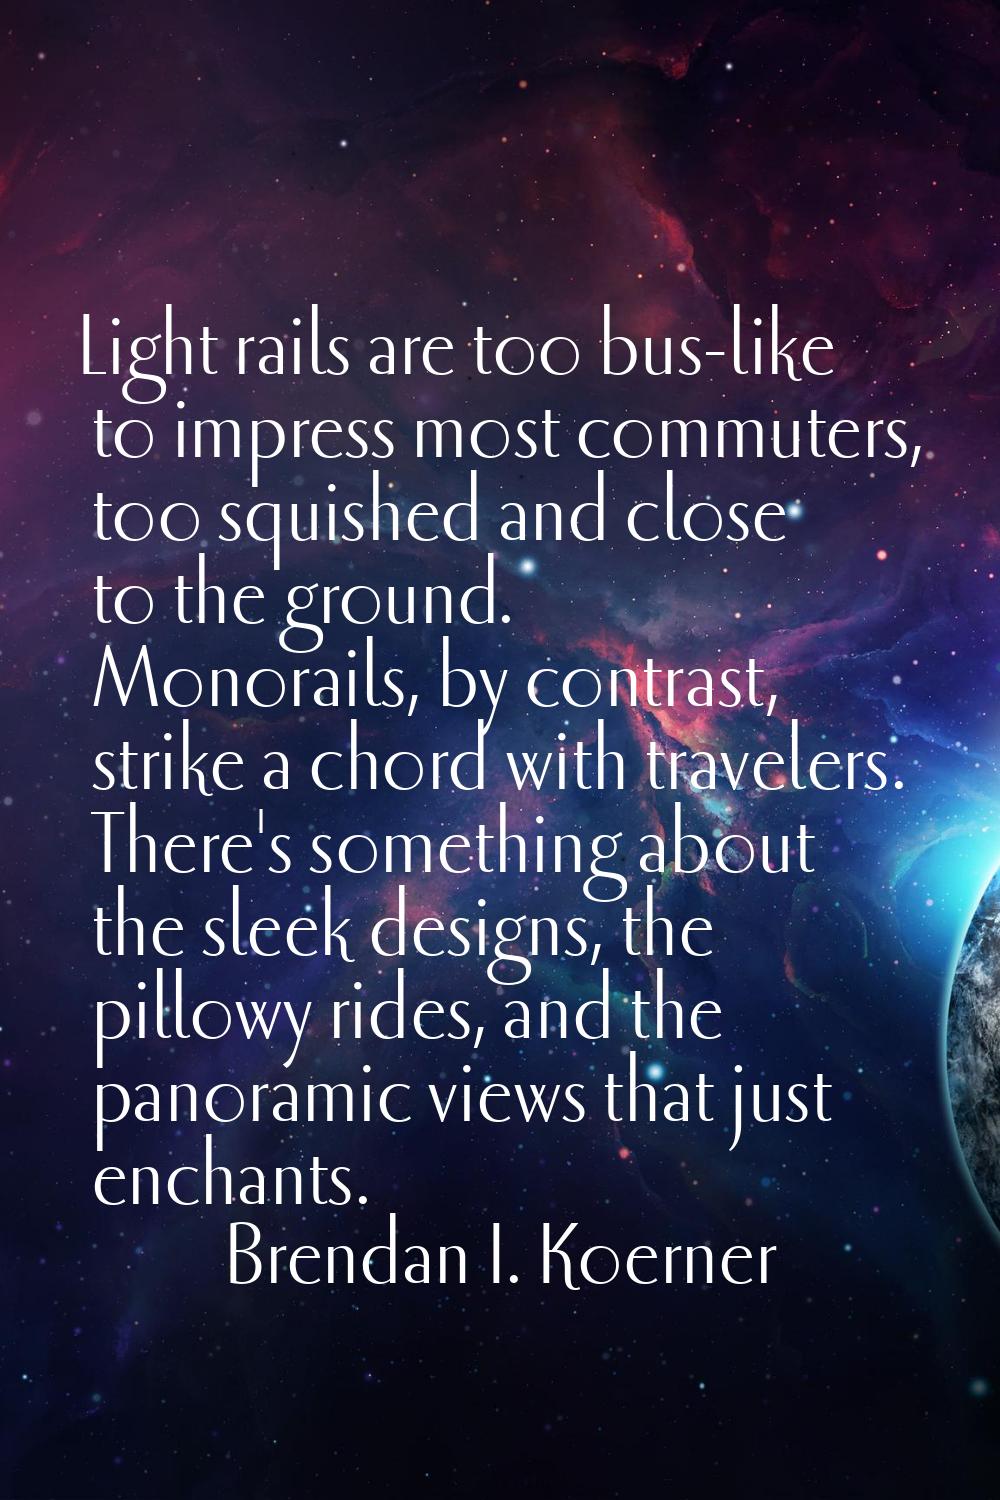 Light rails are too bus-like to impress most commuters, too squished and close to the ground. Monor